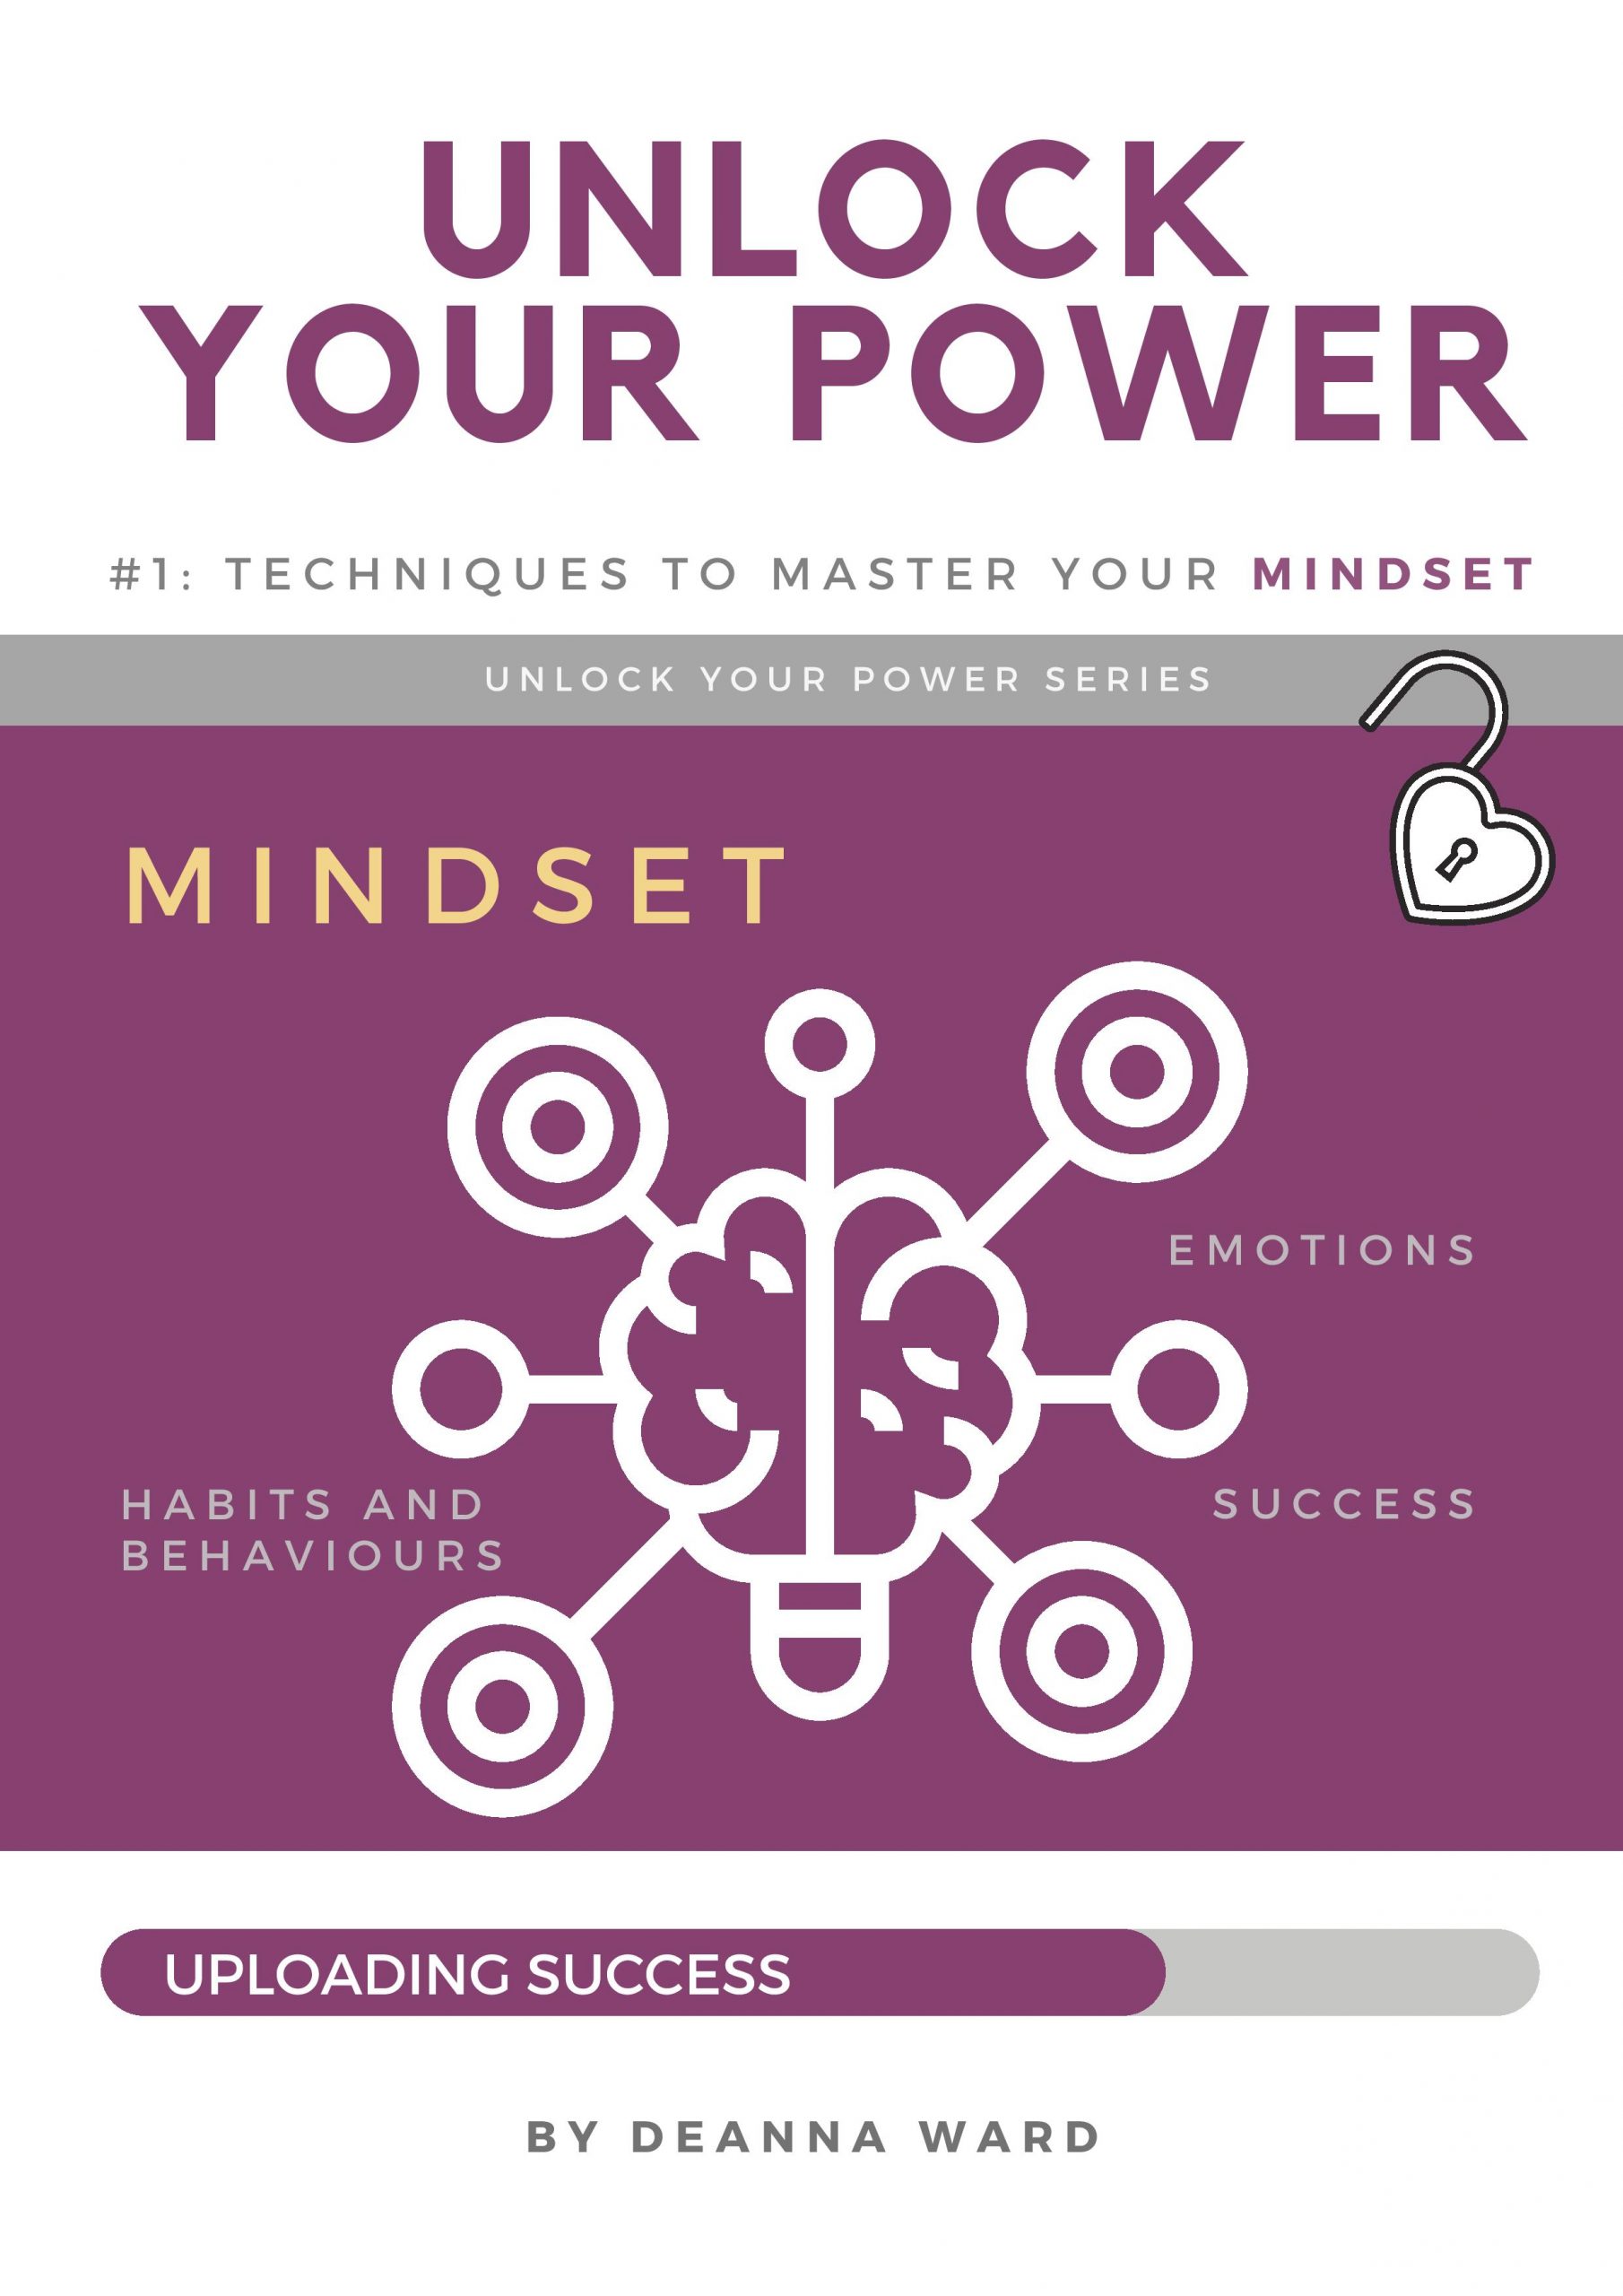 Image of book cover UNLOCK YOUR POWER: #1 Techniques to Master Your Mindset by Deanna C Ward.